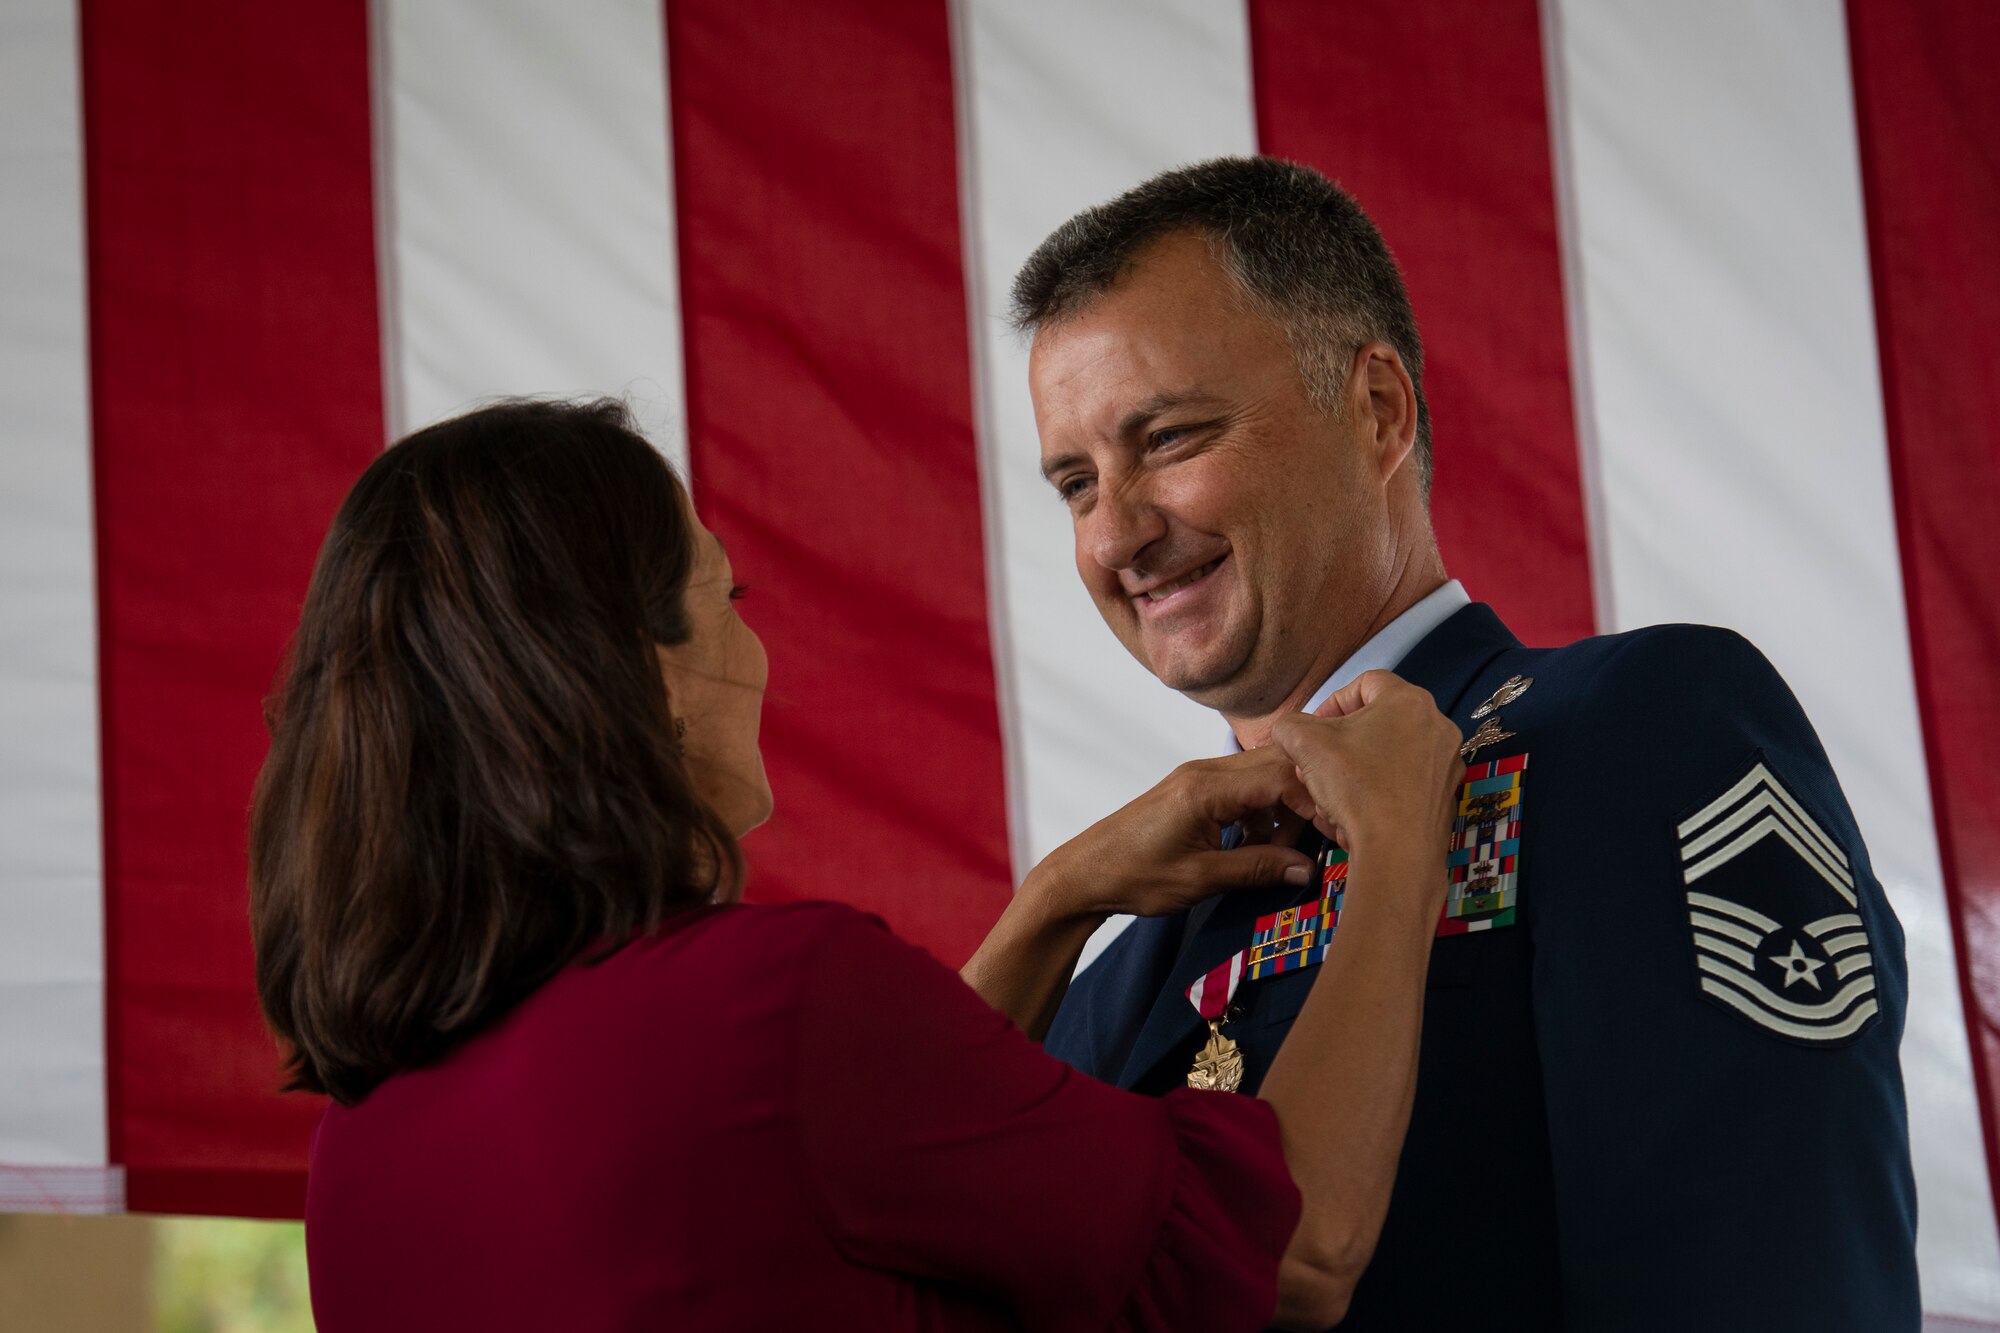 Chief Master Sgt. Michael West, right, a special tactics combat controller with the 24th Special Operations Wing, receives his retirement pin from his wife, Paola West, during a retirement ceremony at Hurlburt Field, Florida, Oct. 19, 2018.